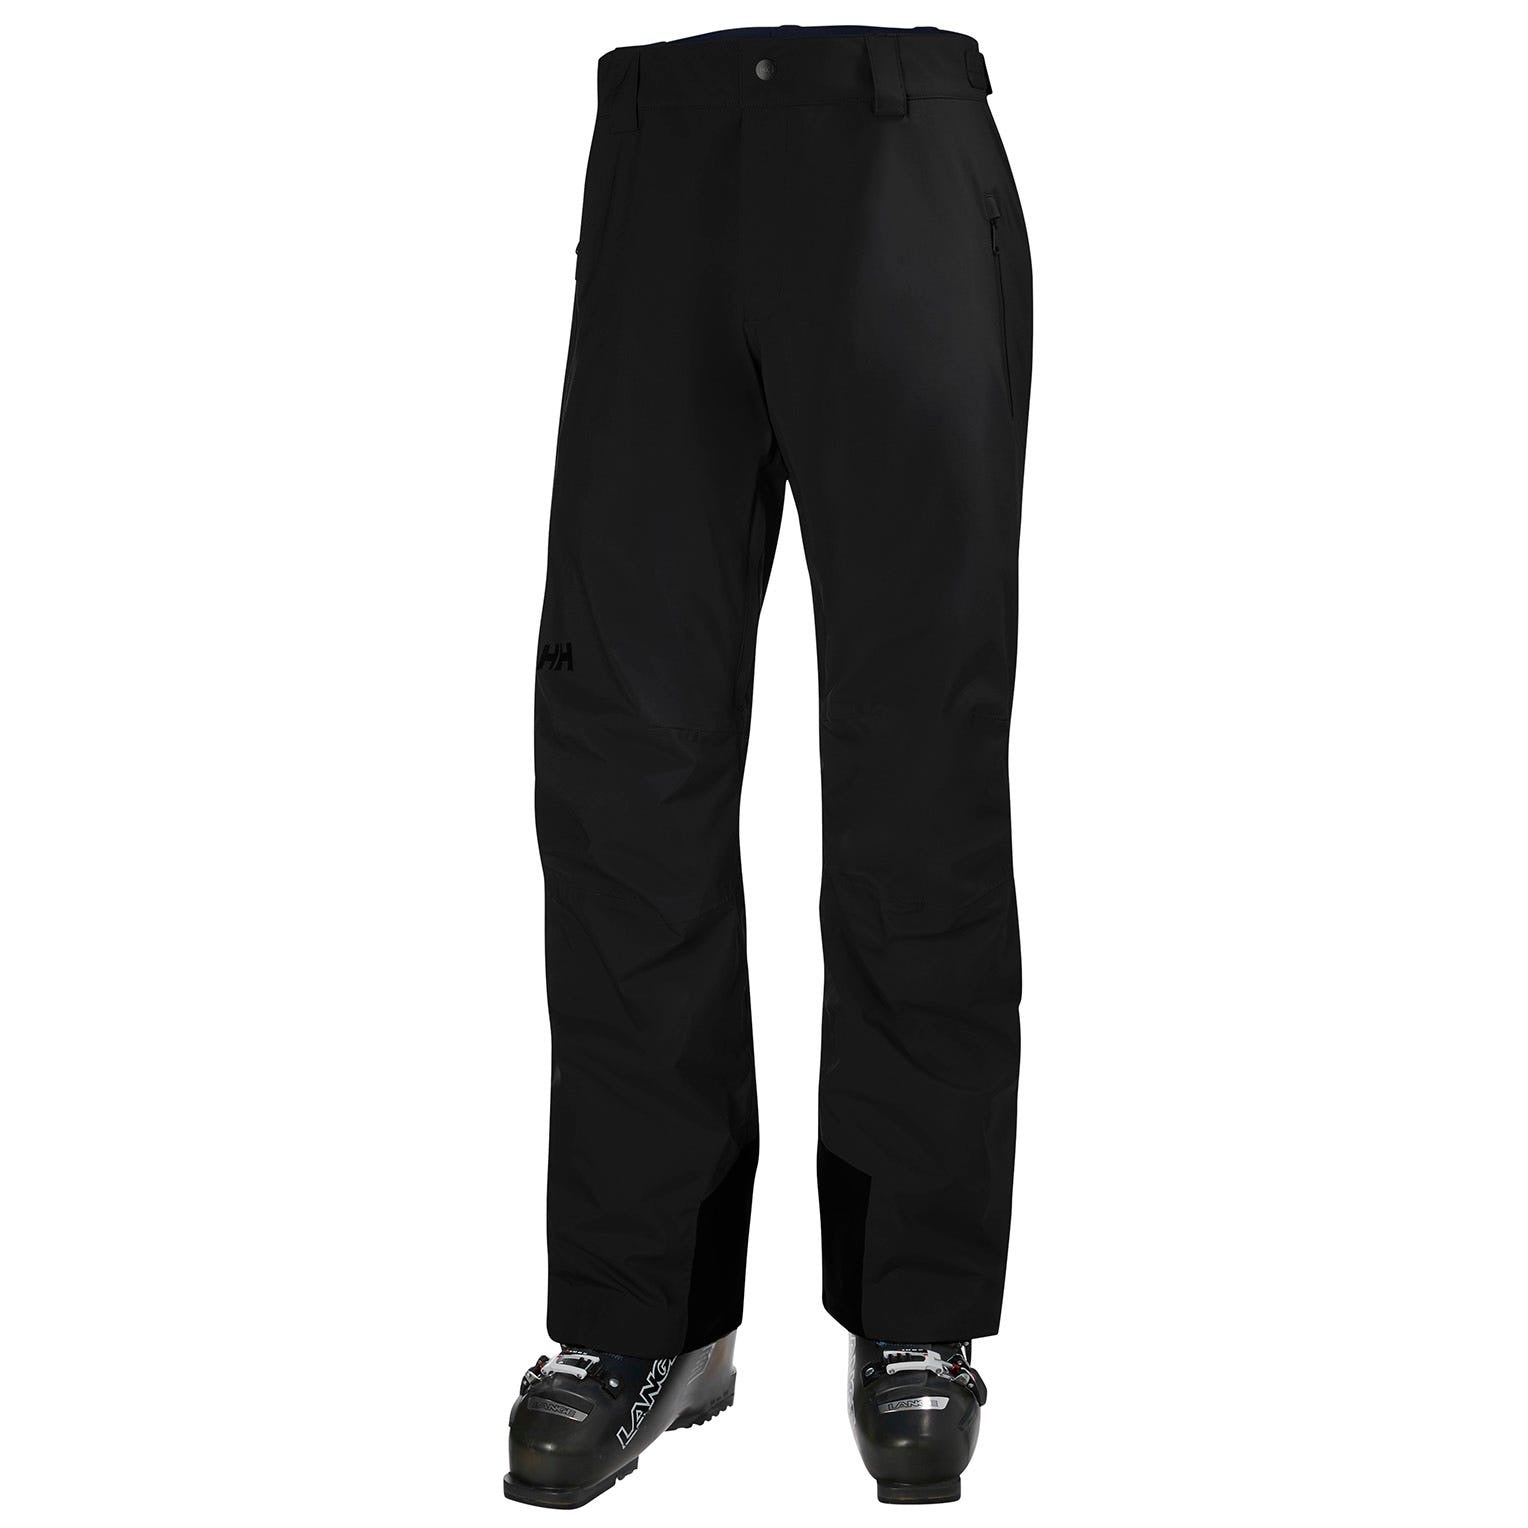 HSMQHJWE Black Denim Pants Men Boys Winter Clothes Size 6 Men'S Autumn And  Winter Pant Trouser Solid Color Casual Overalls With Lace-Up Sports Loose  Casual Trousers - Walmart.com